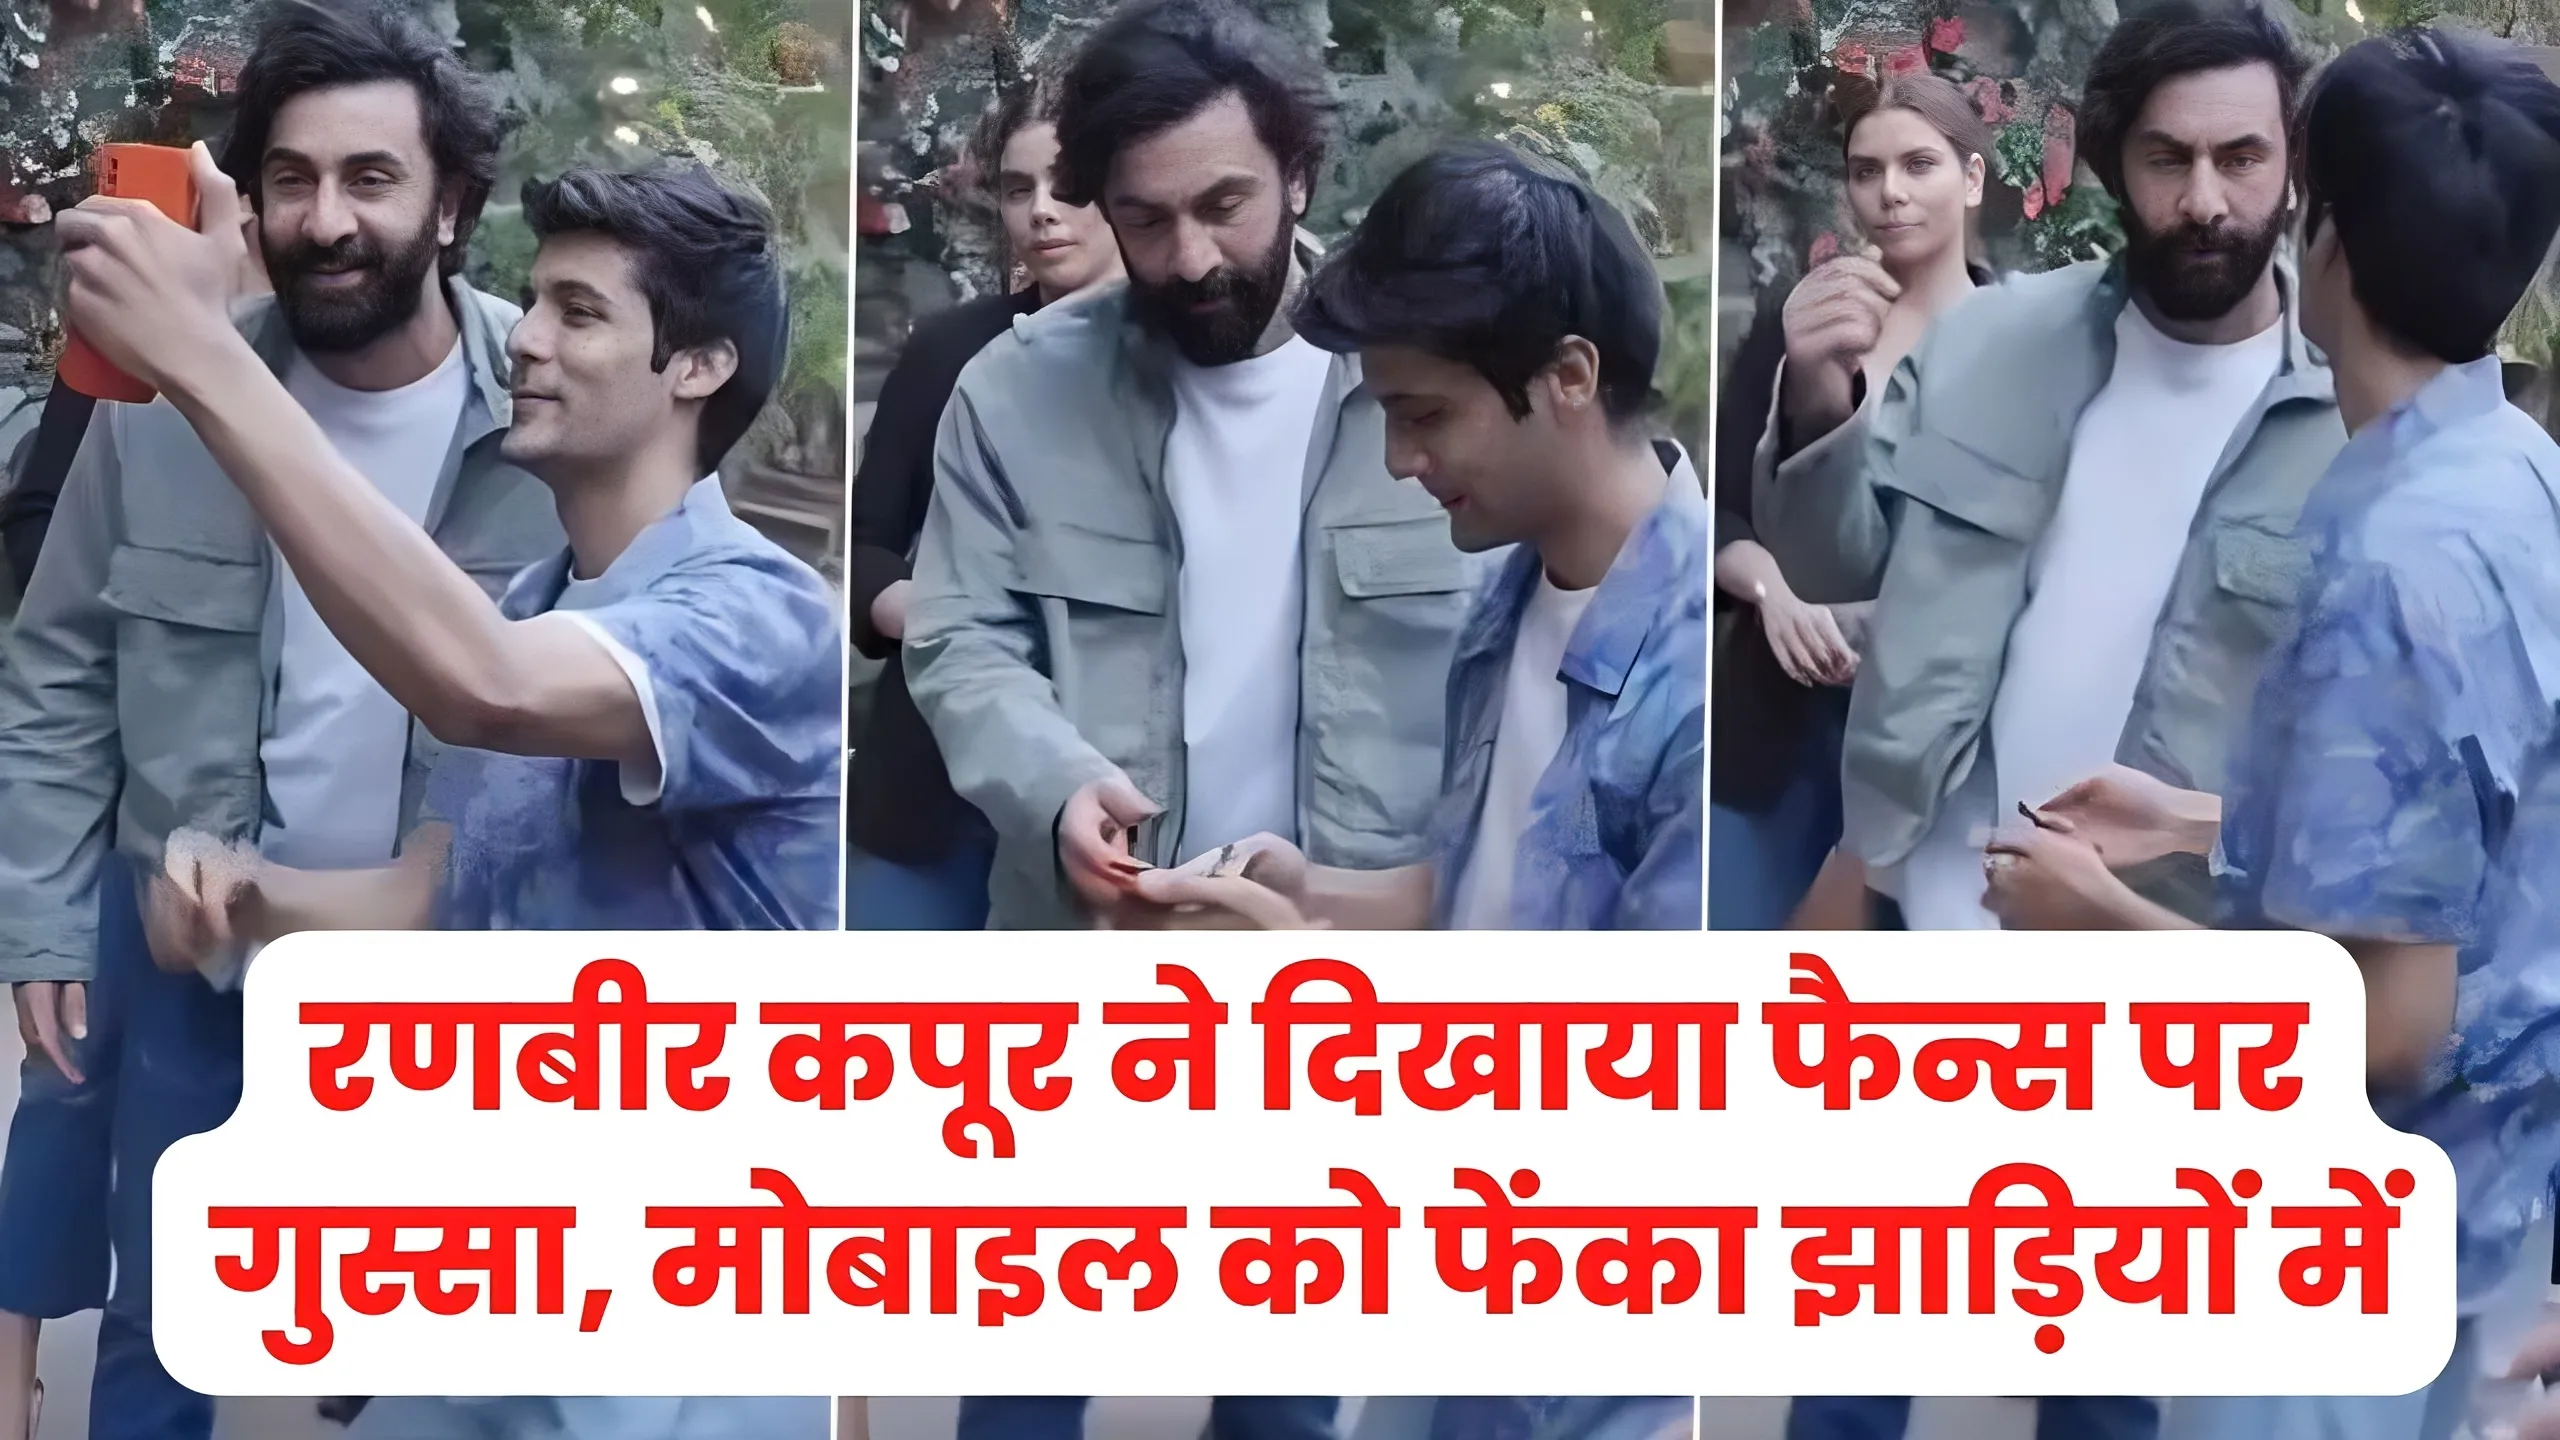 Ranbir Kapoor showed anger on fans by throwing mobile in the bushes